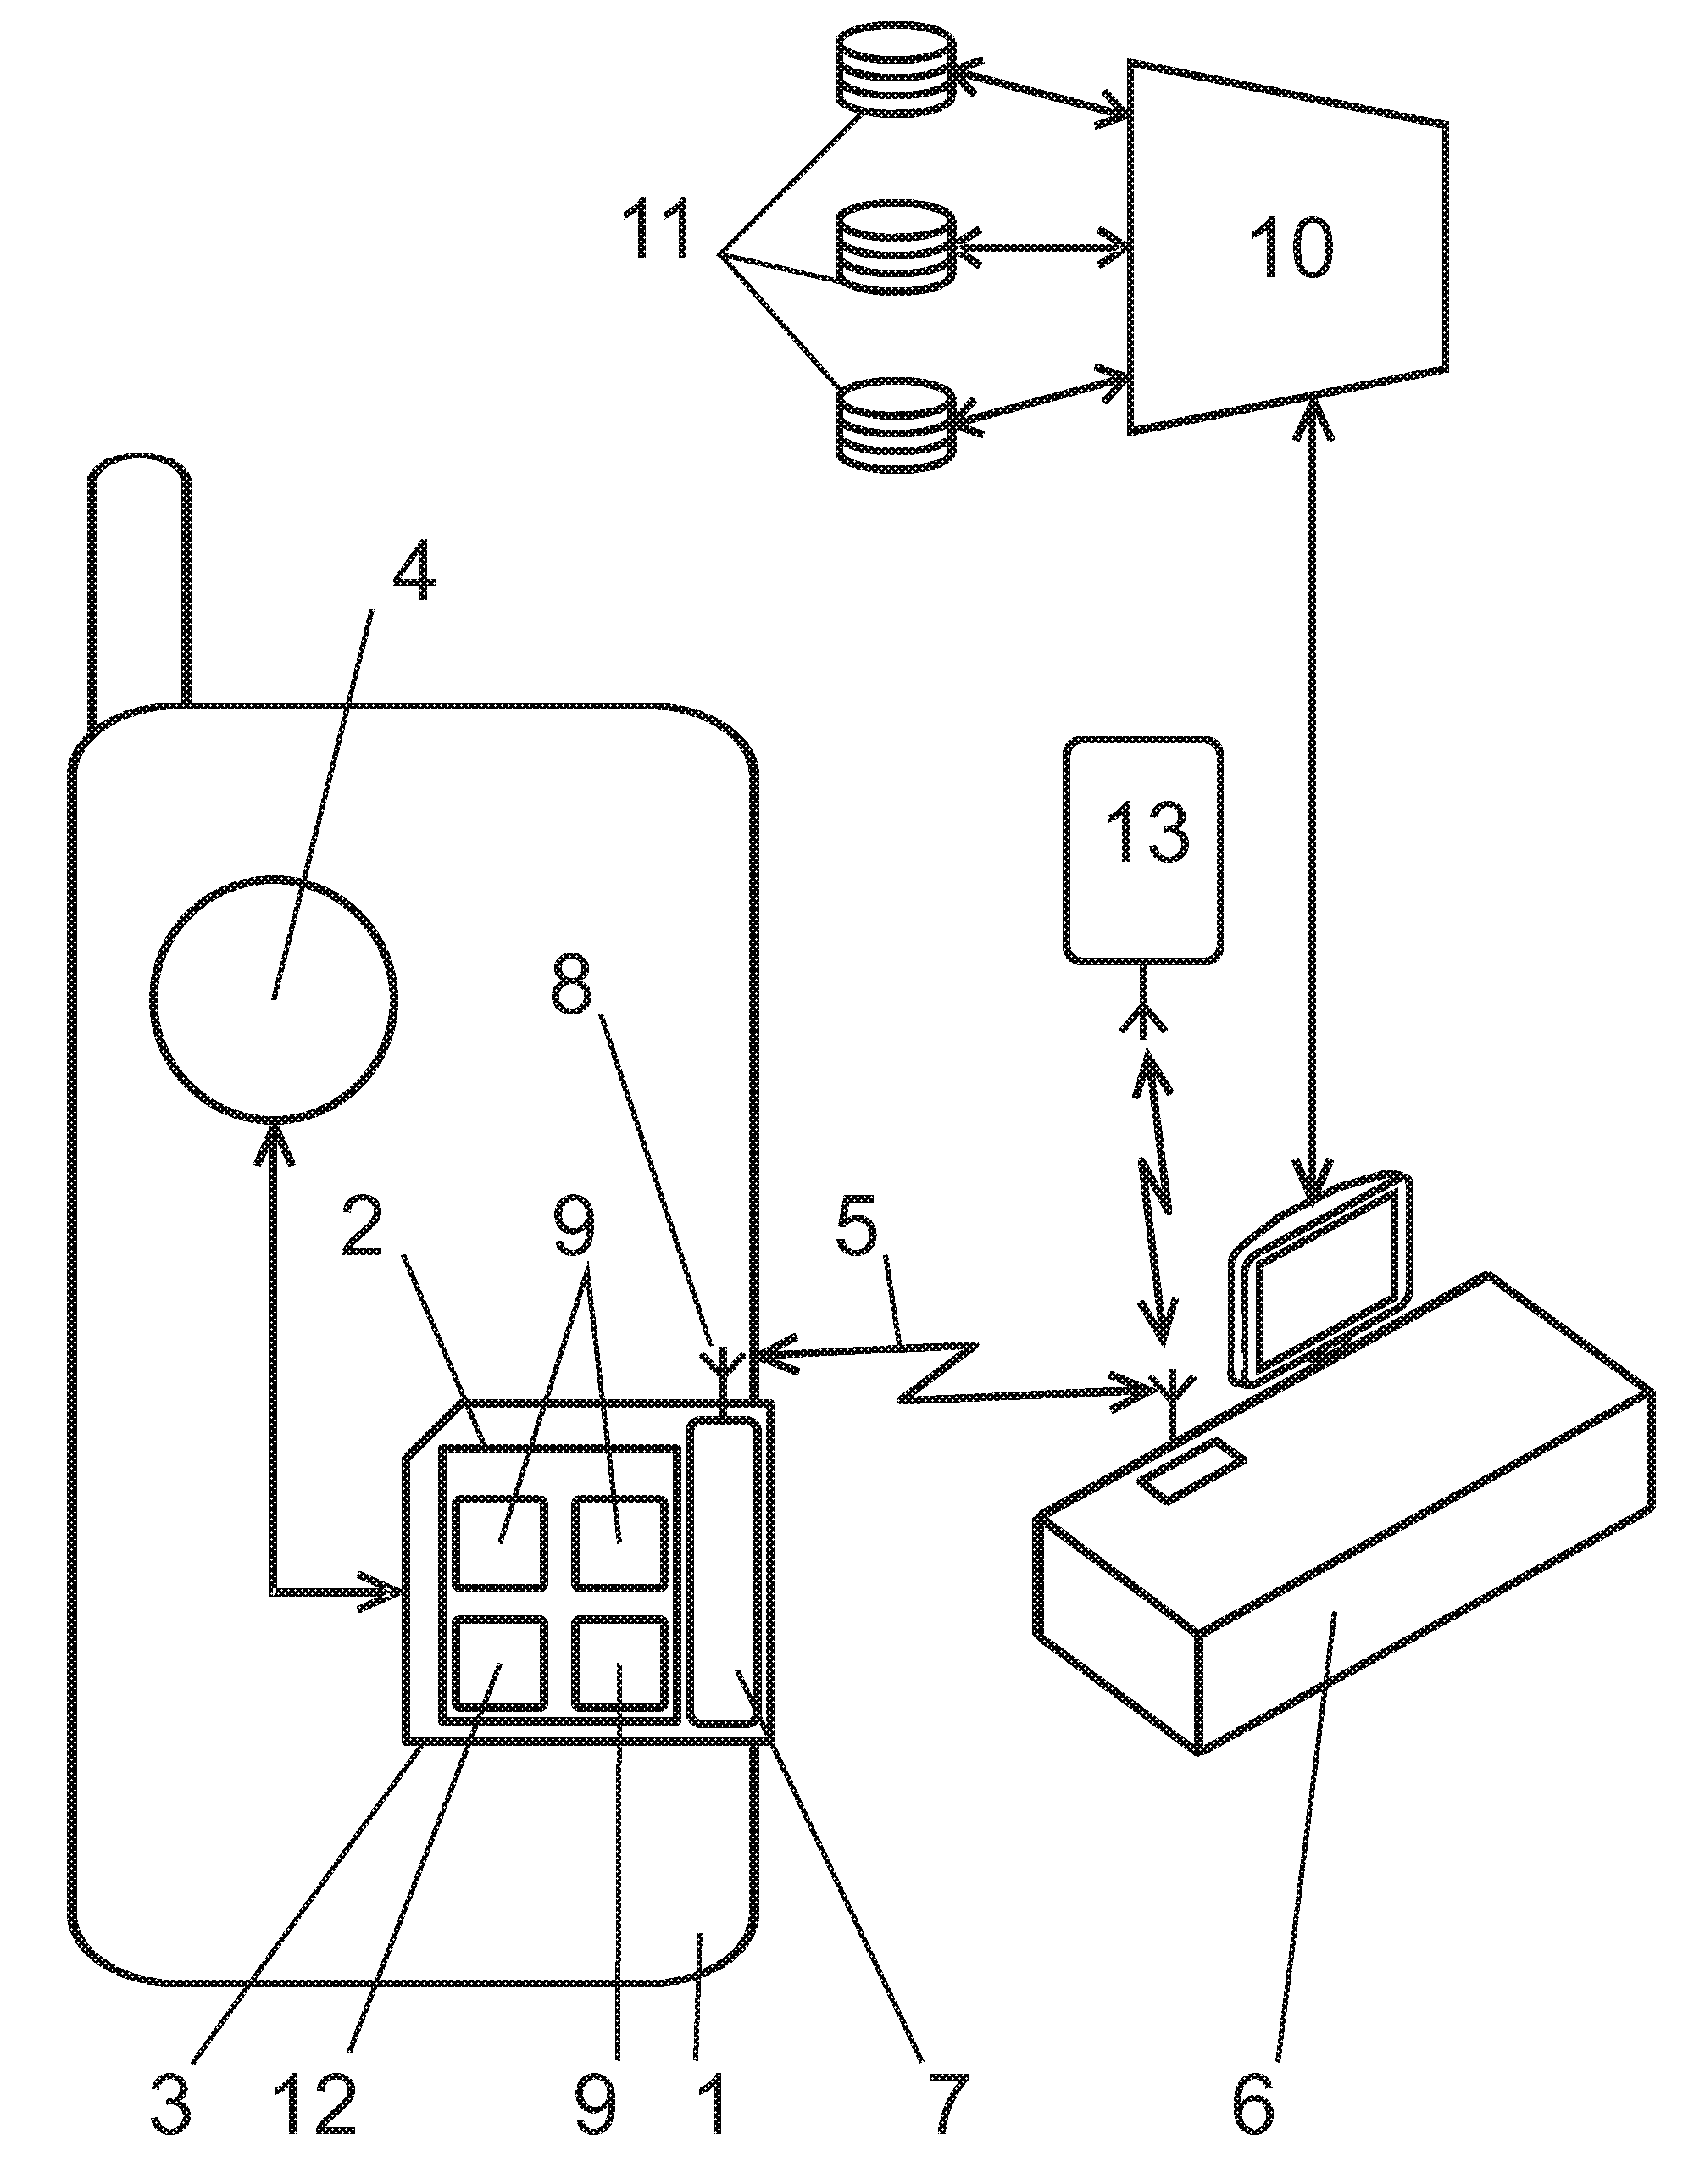 System and method of contactless authorization of a payment